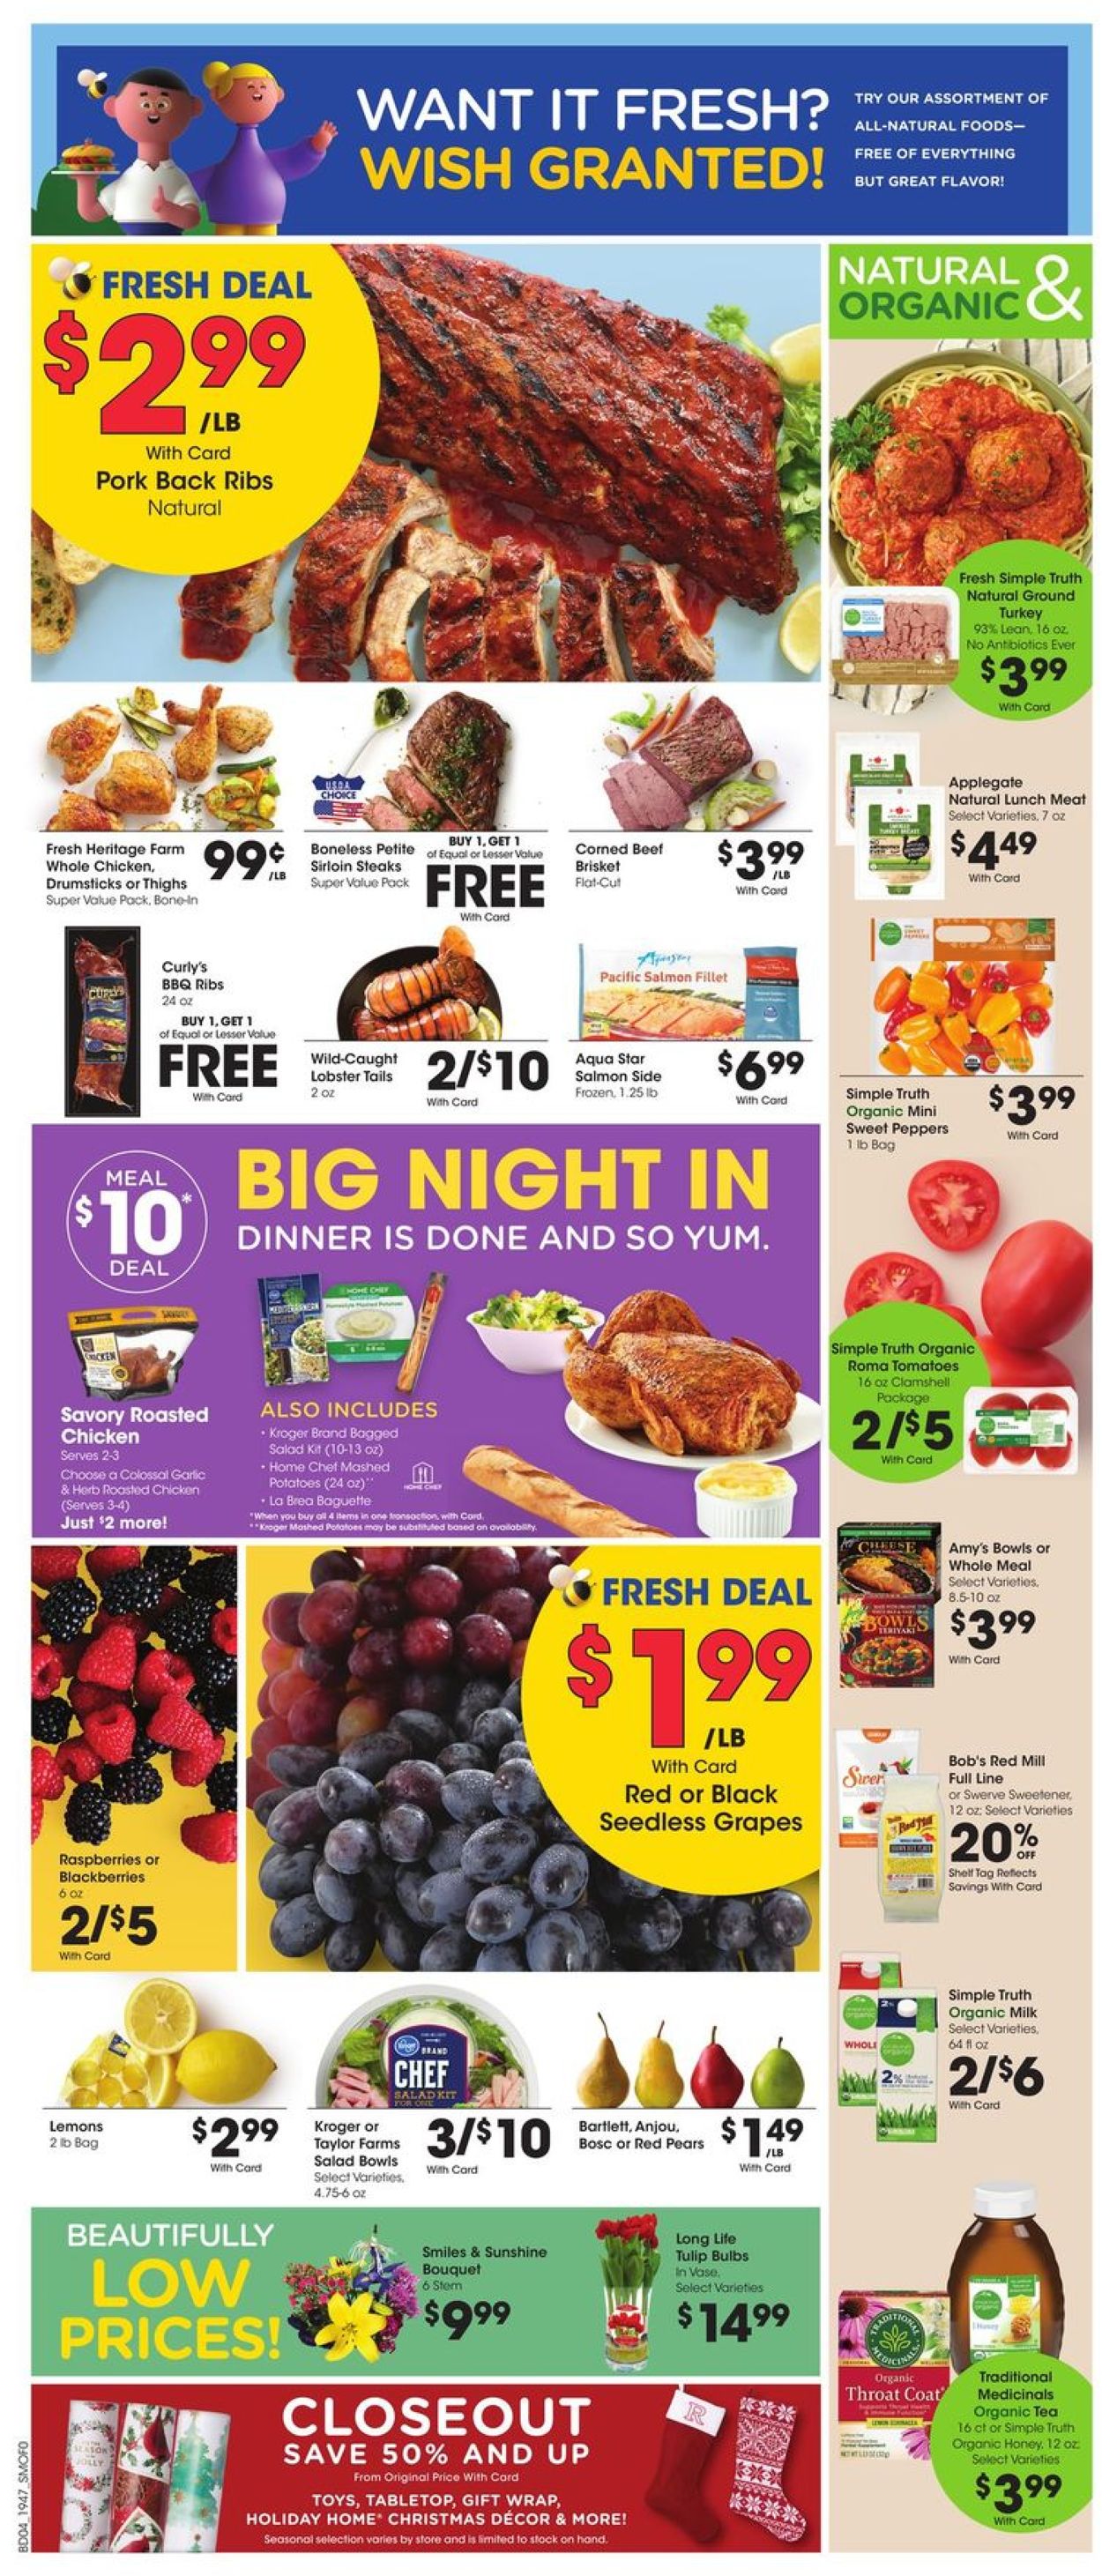 Catalogue Smith's - New Year's Ad 2019/2020 from 12/26/2019